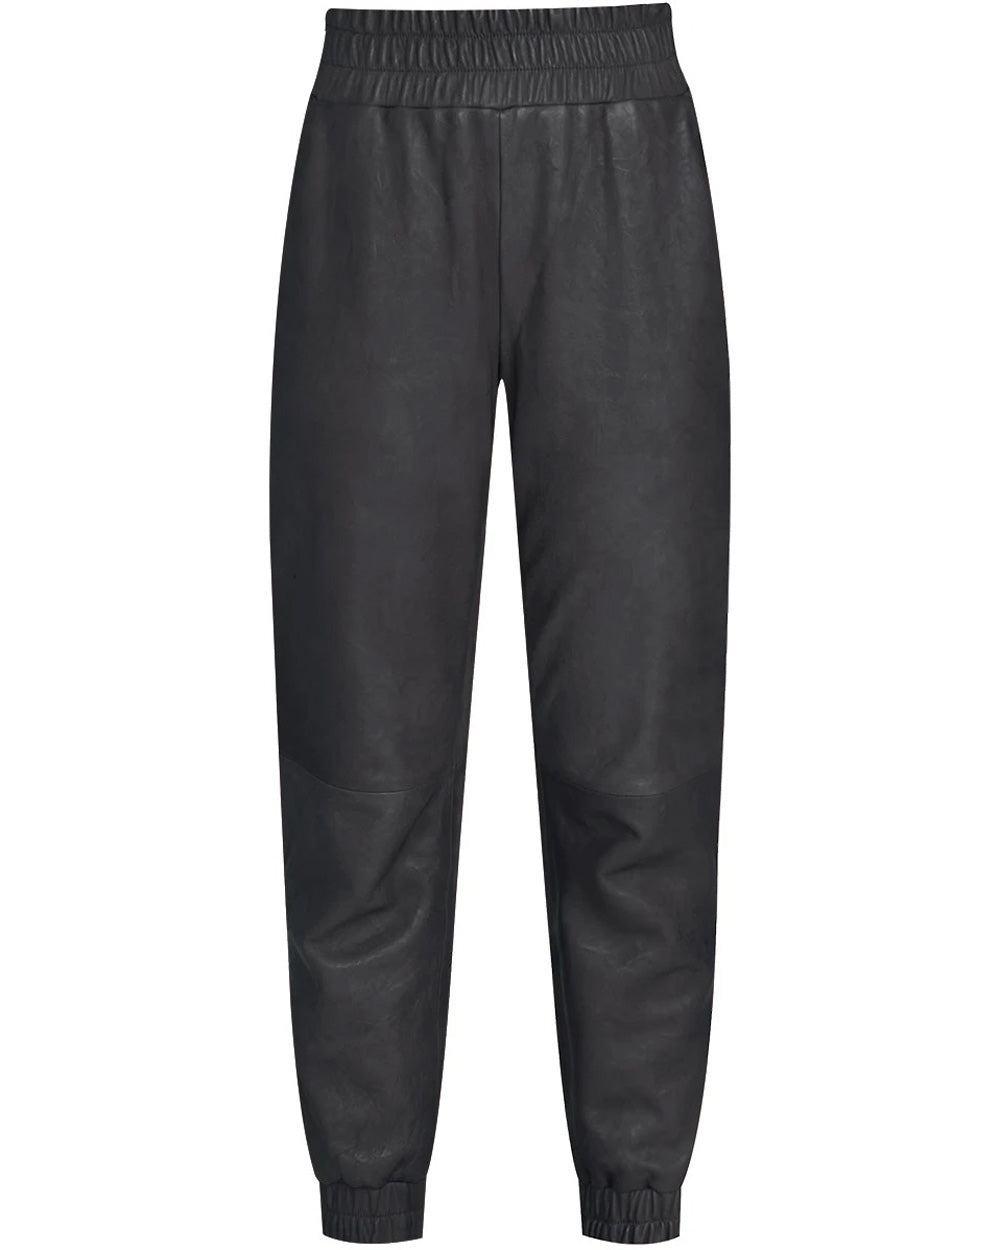 Black Leather Wasia Pant